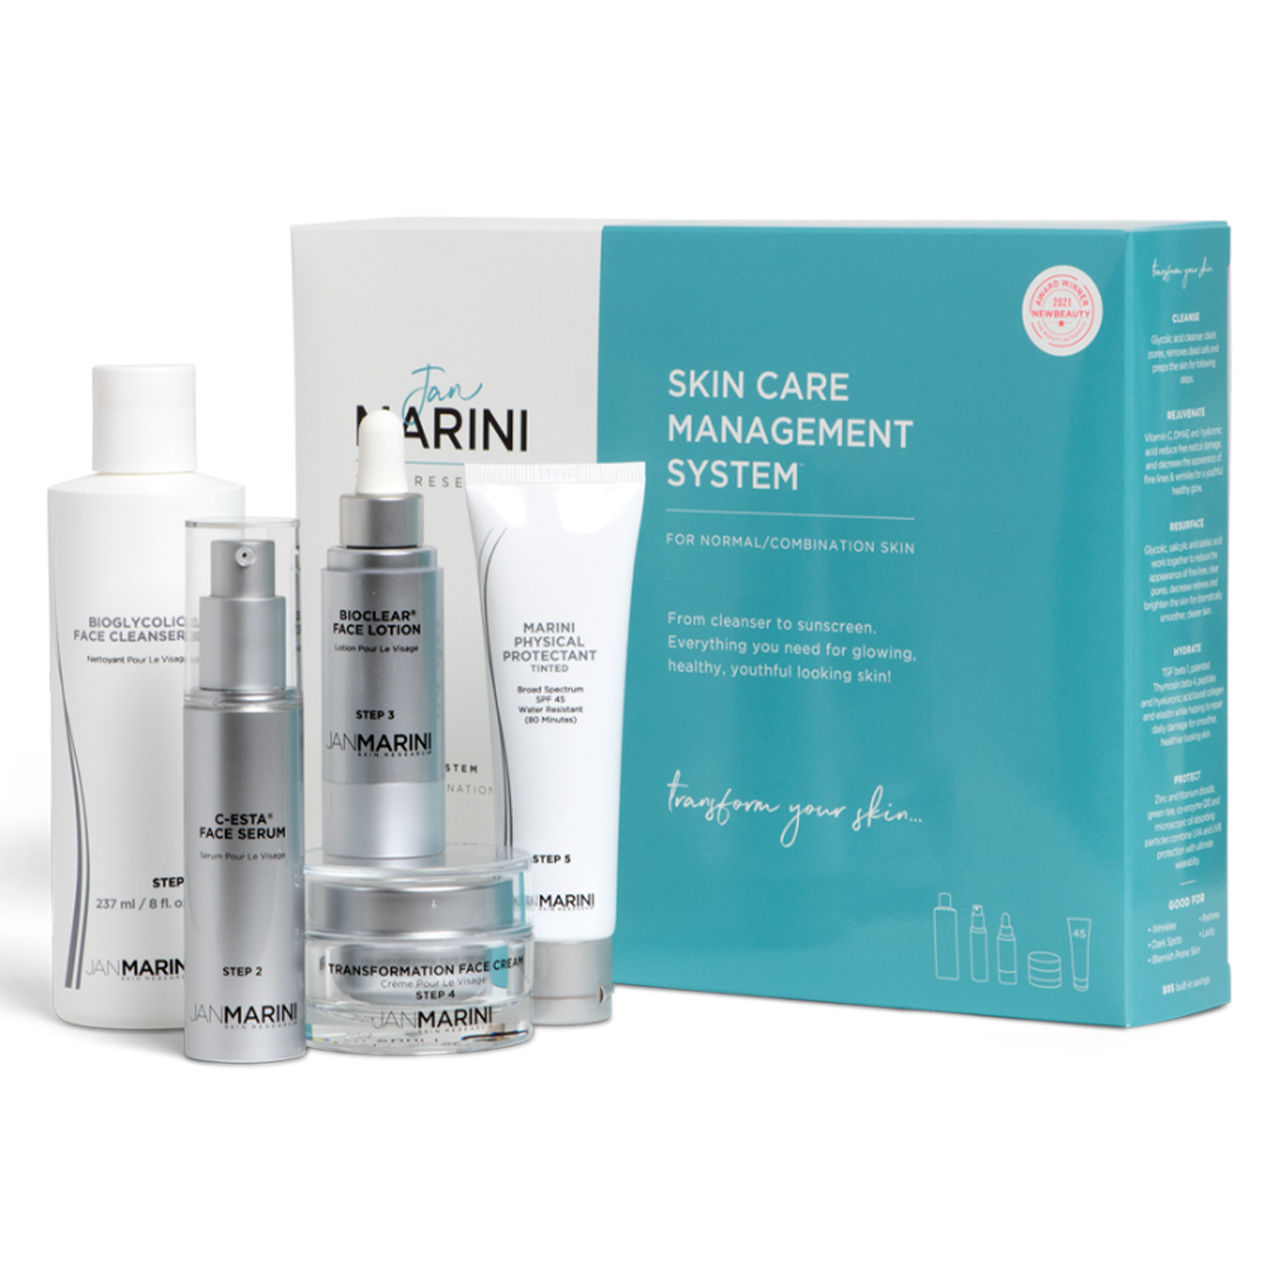 Jan Marini Normal/Combination Skin Care Management System With Physical Protectant Tinted SPF 45 - 5 pcs (S0141KMPP) Questions & Answers